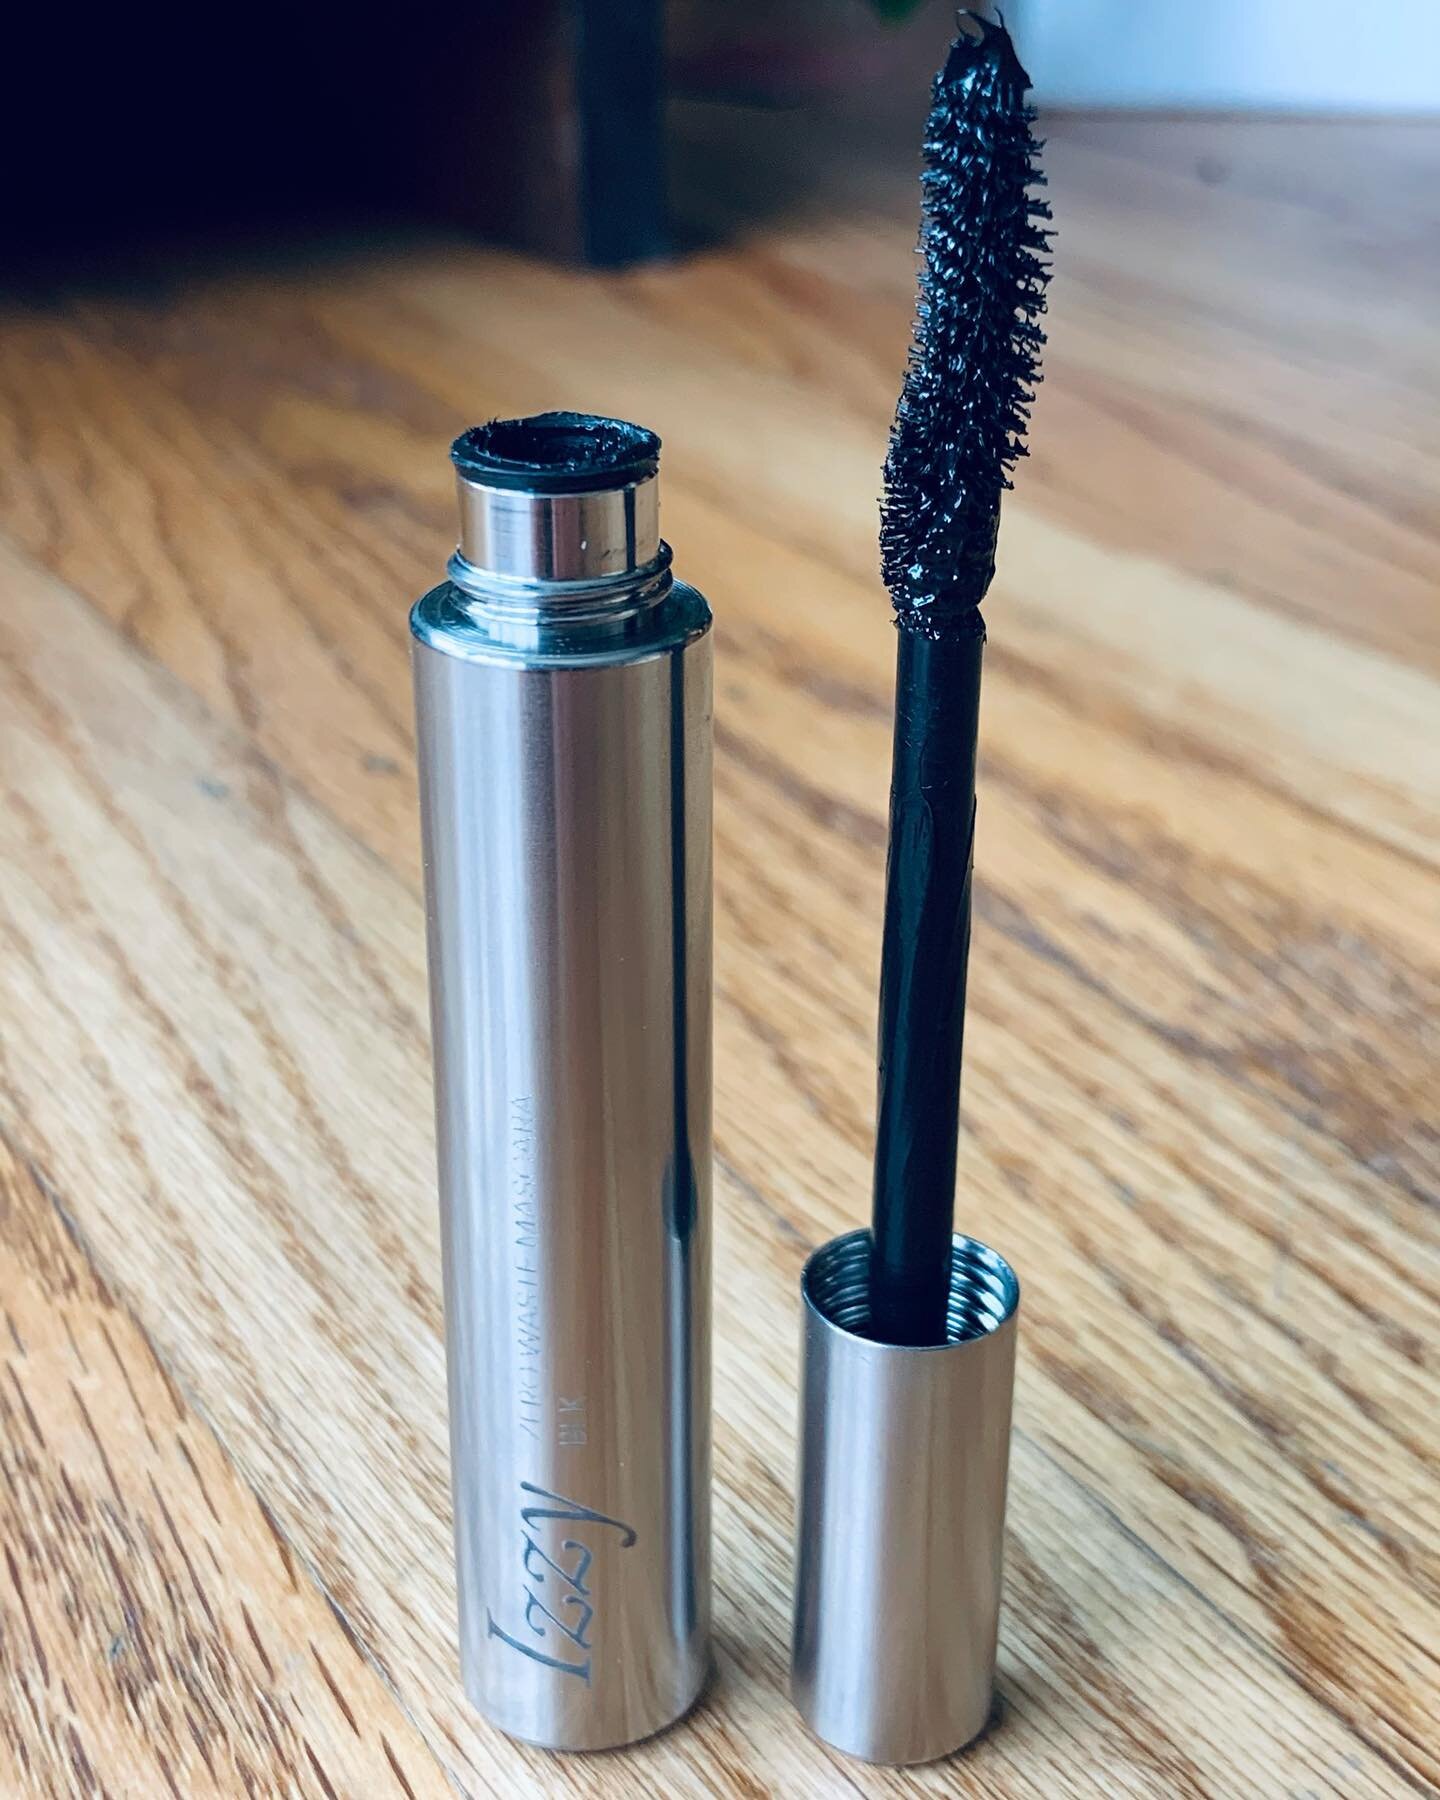 Zero waste mascara: It took me many years to find my dream mascara but I finally found it! @izzyzerowastebeauty Their stainless steel tubes are designed to be cleaned and REFILLED over 10,000 times, so you never have to throw away another mascara for